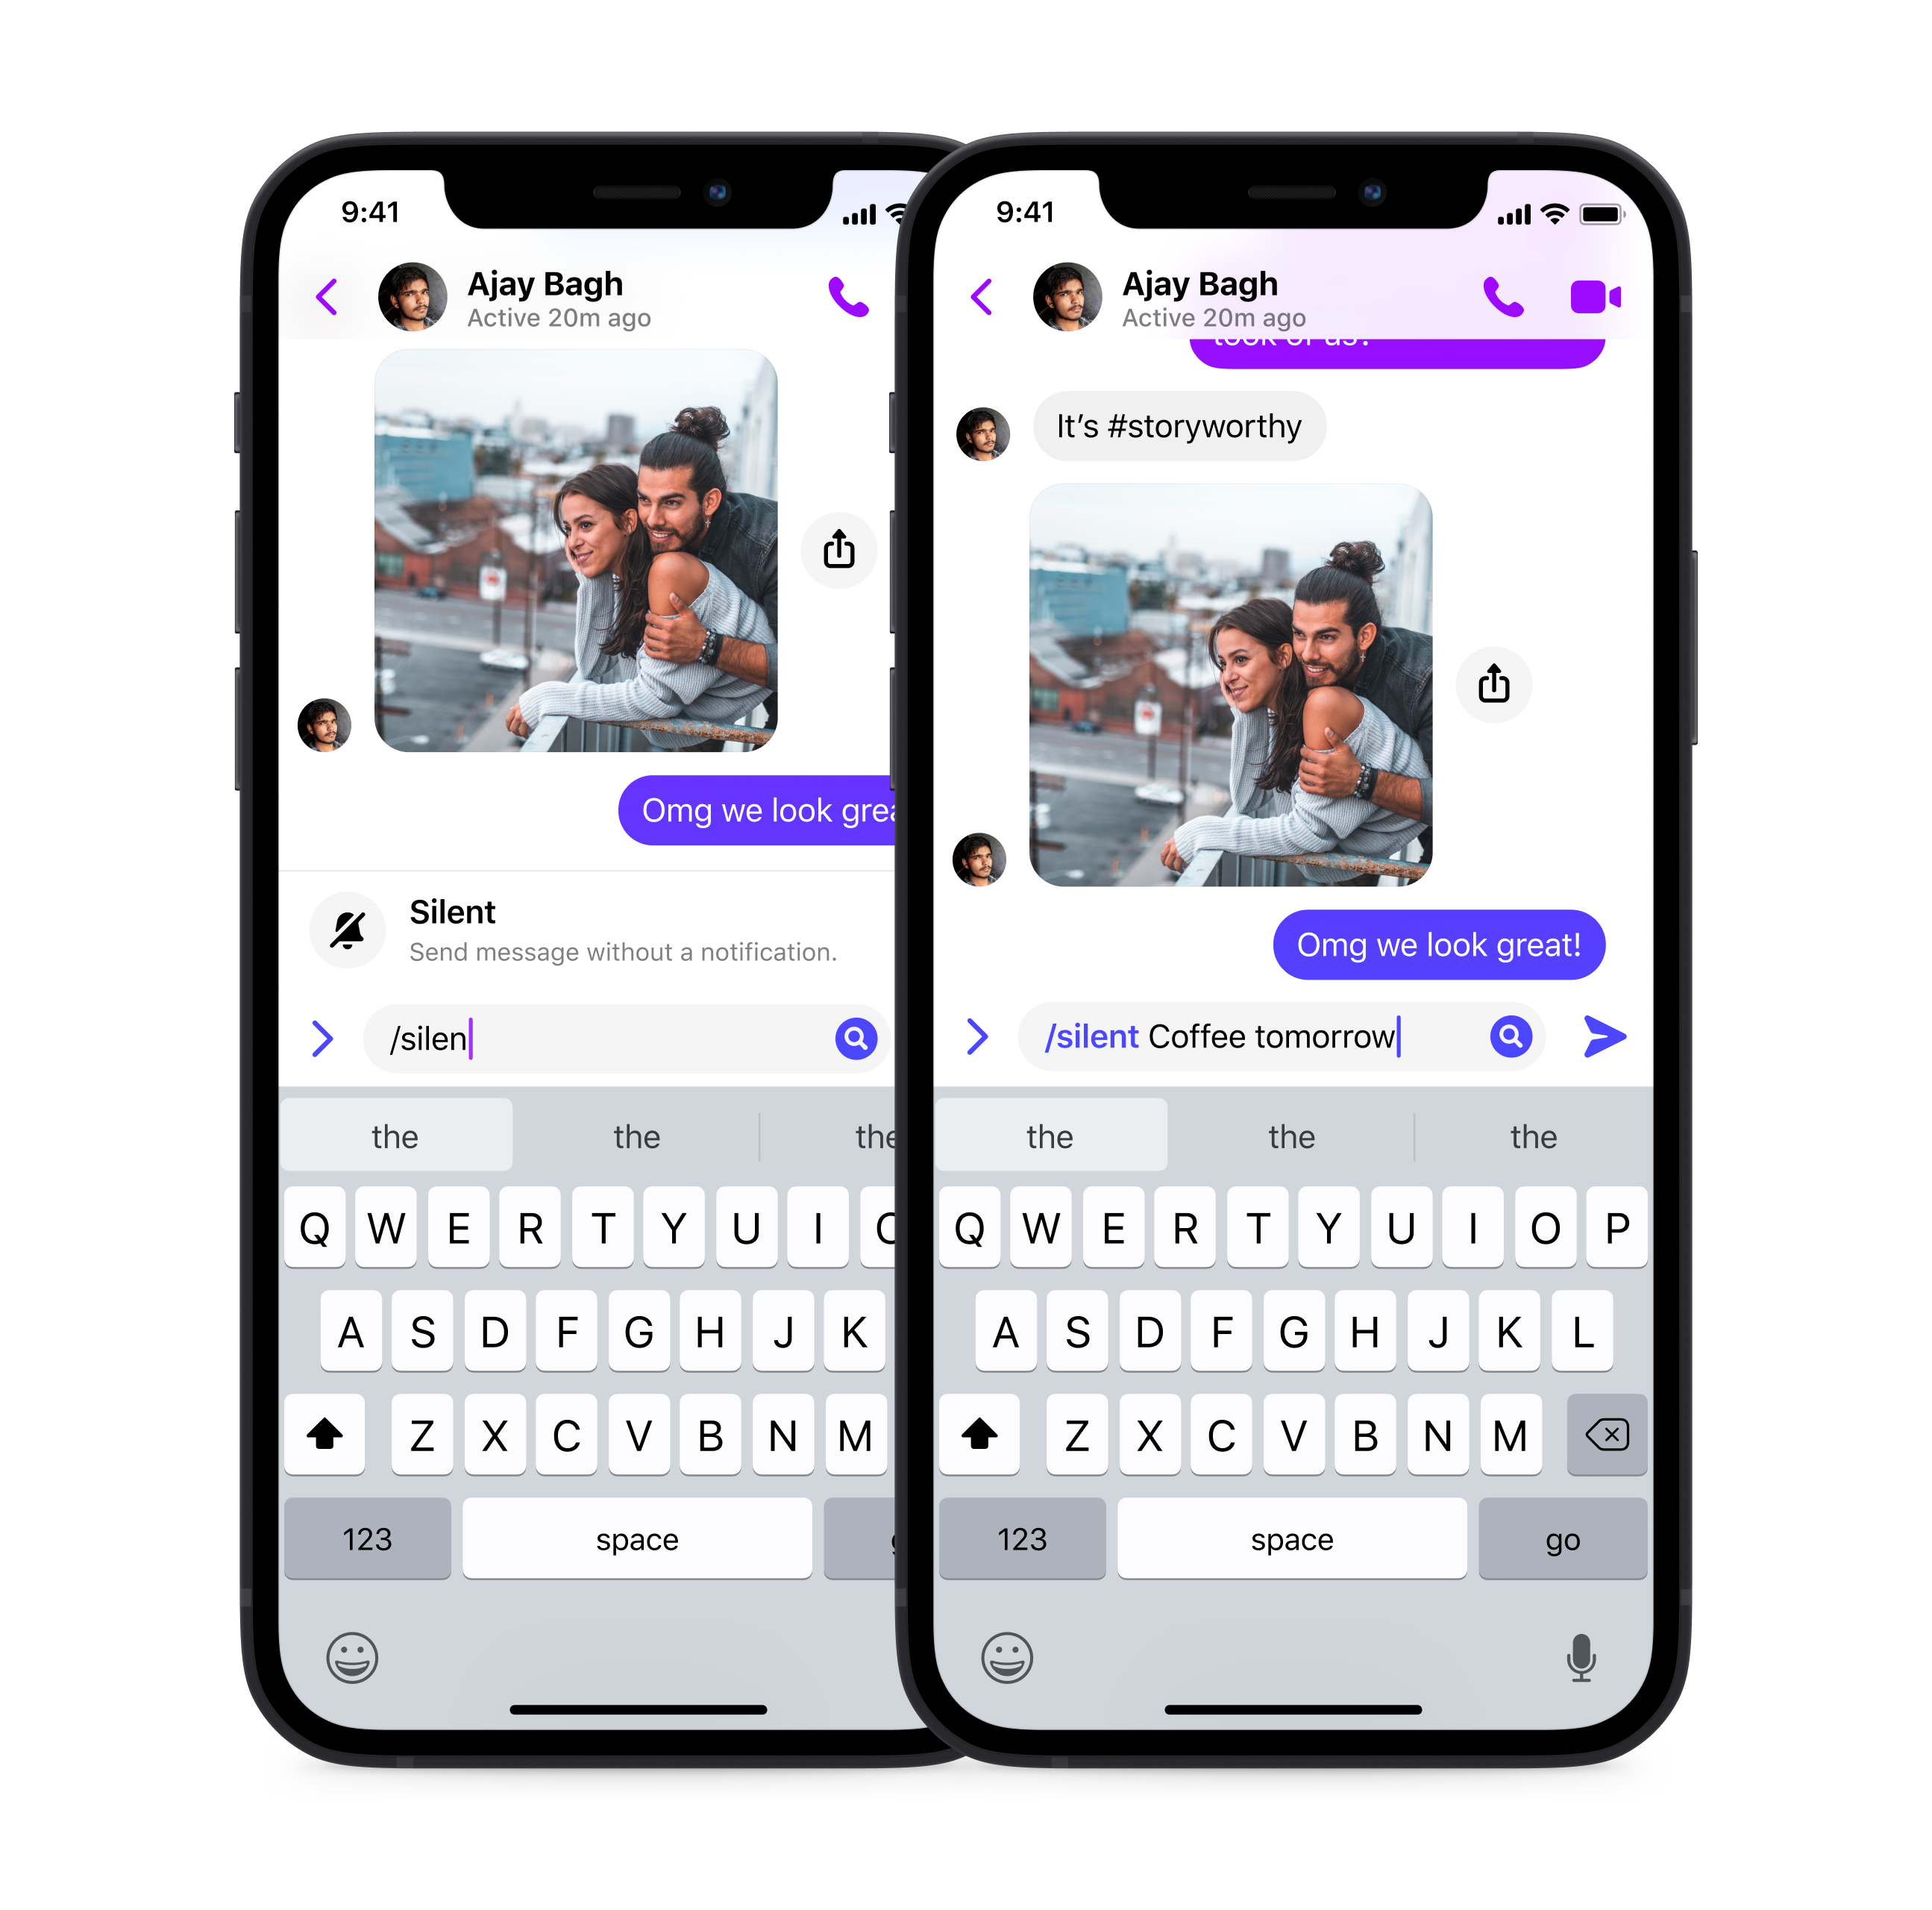 Facebook mobile chat without messenger